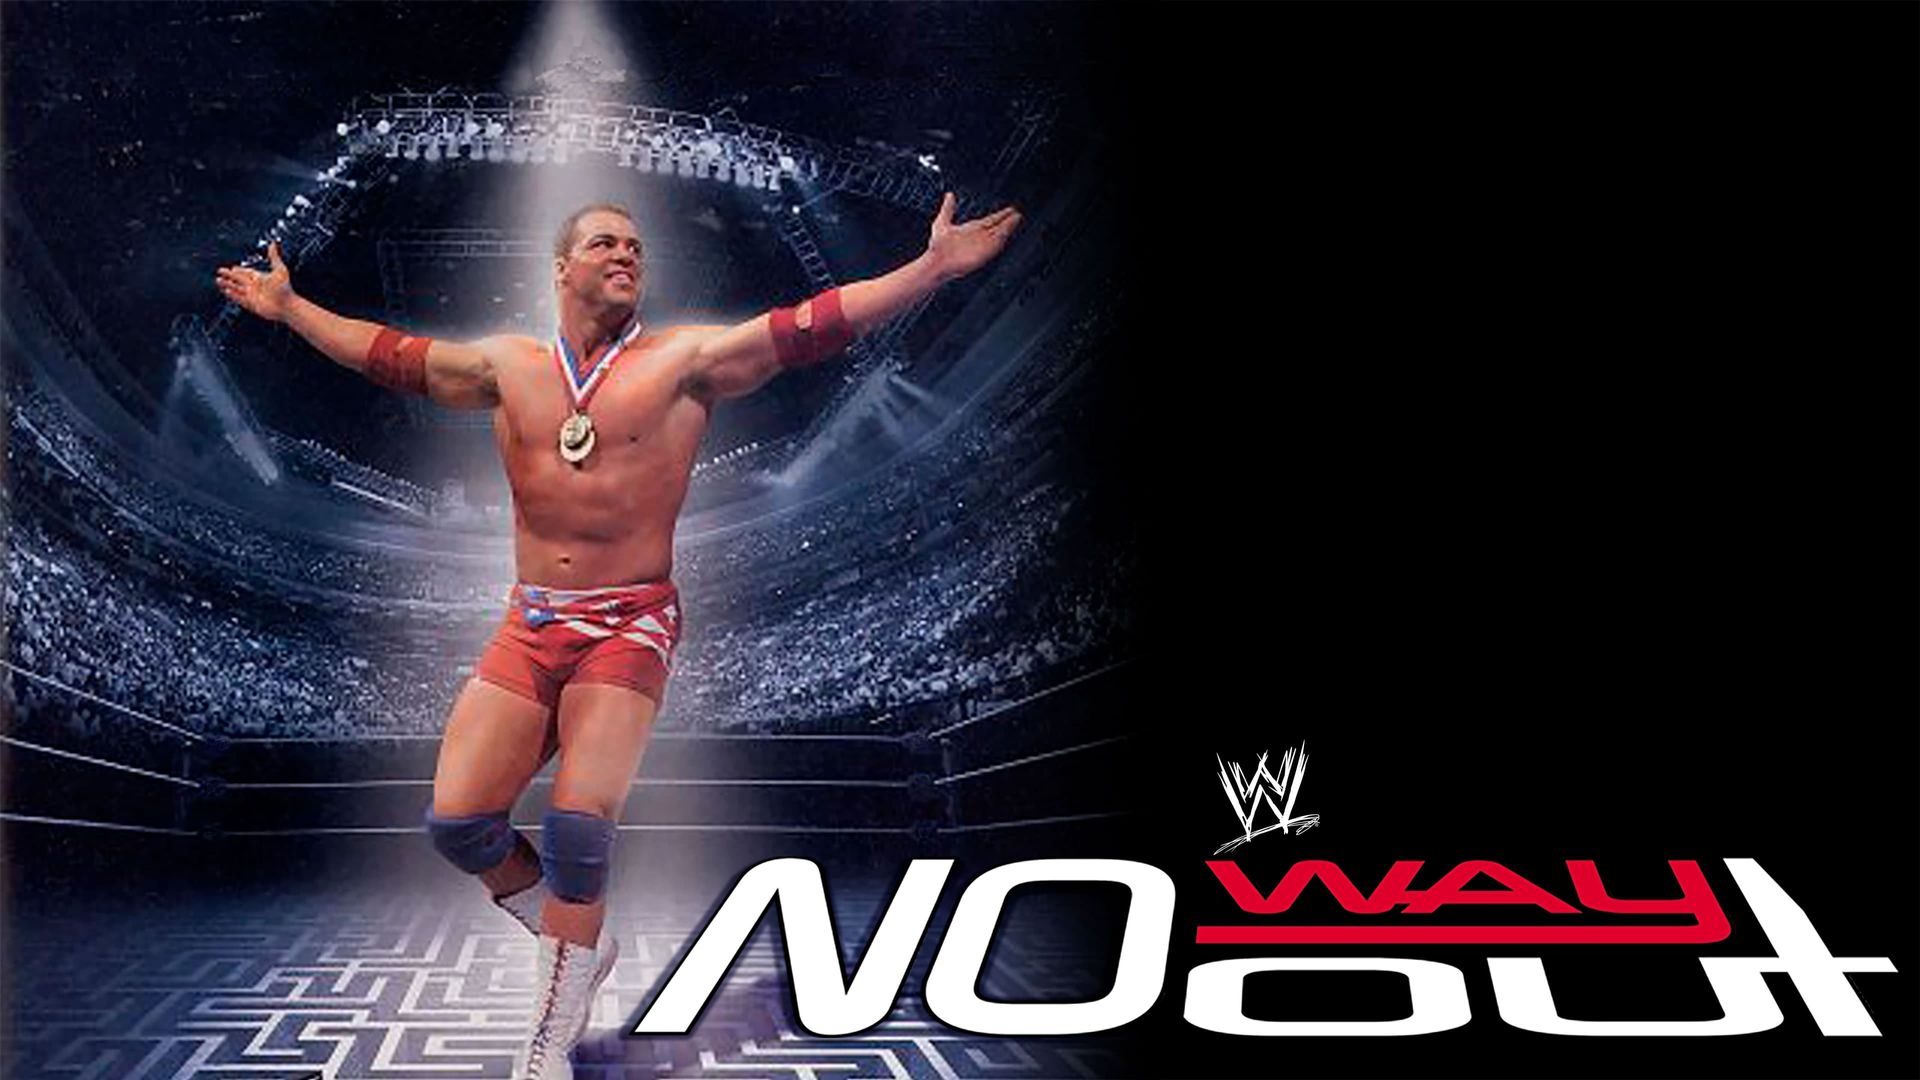 WWF No Way Out background